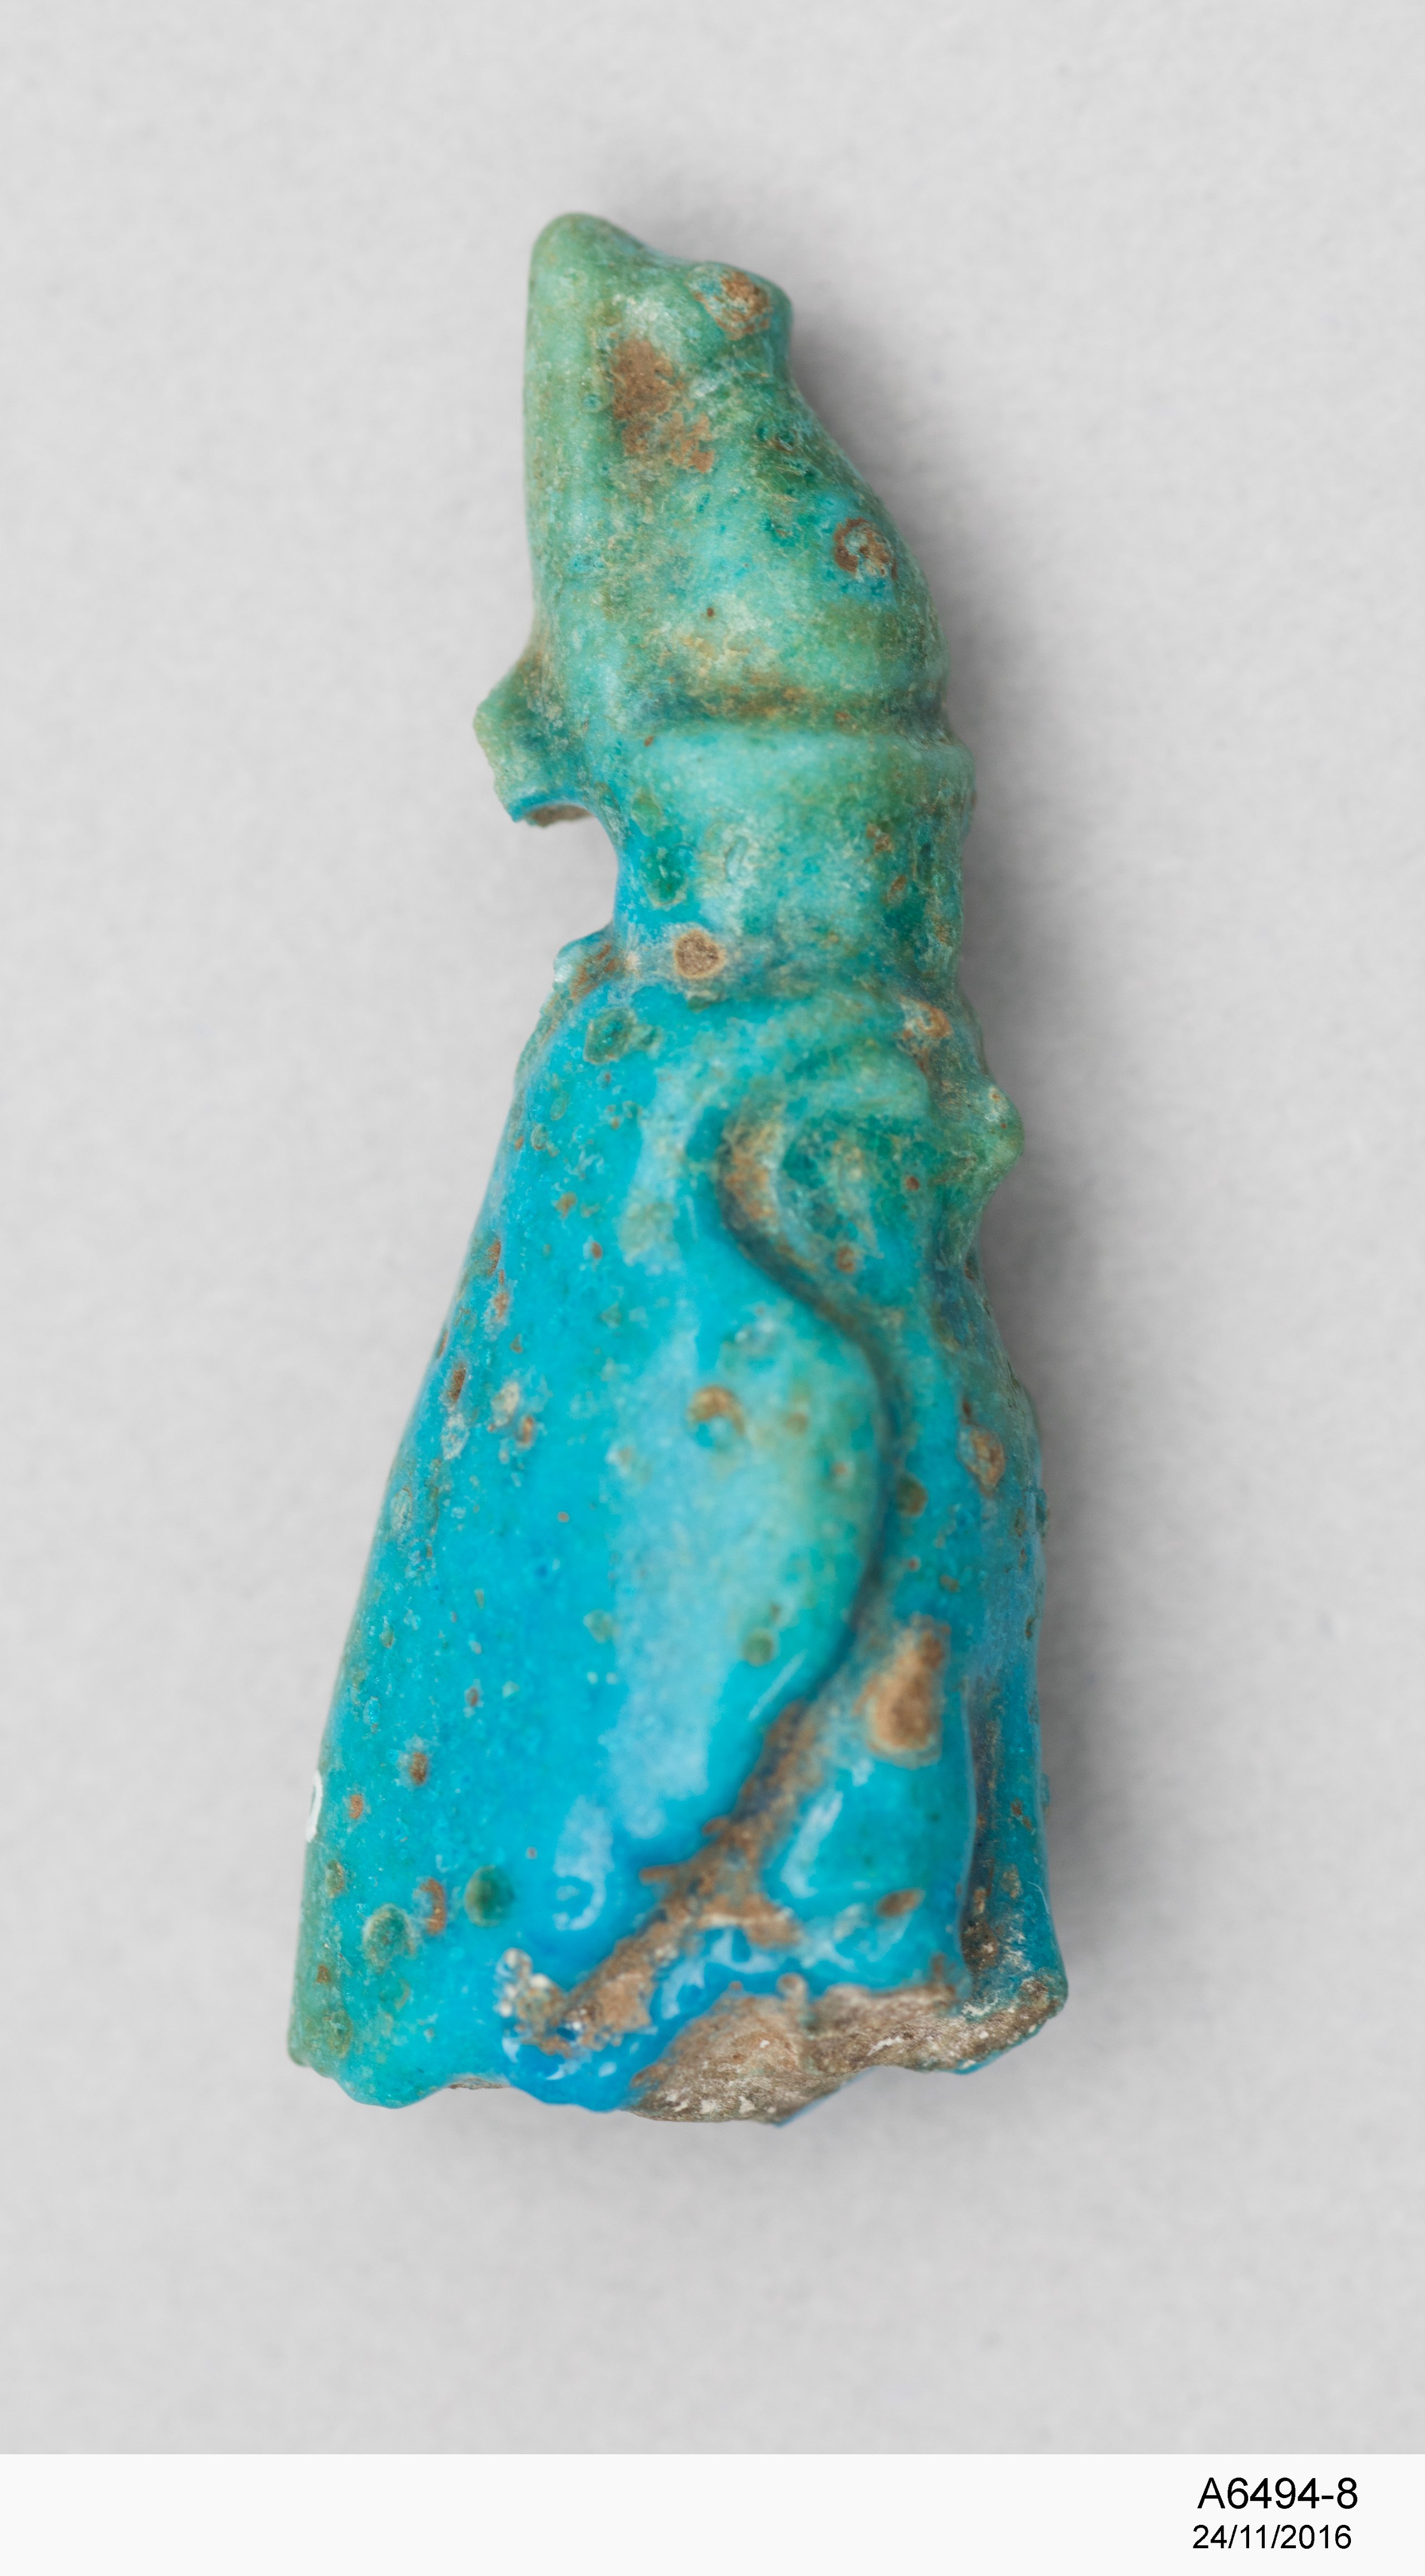 Faience amulet of Horus from Egypt